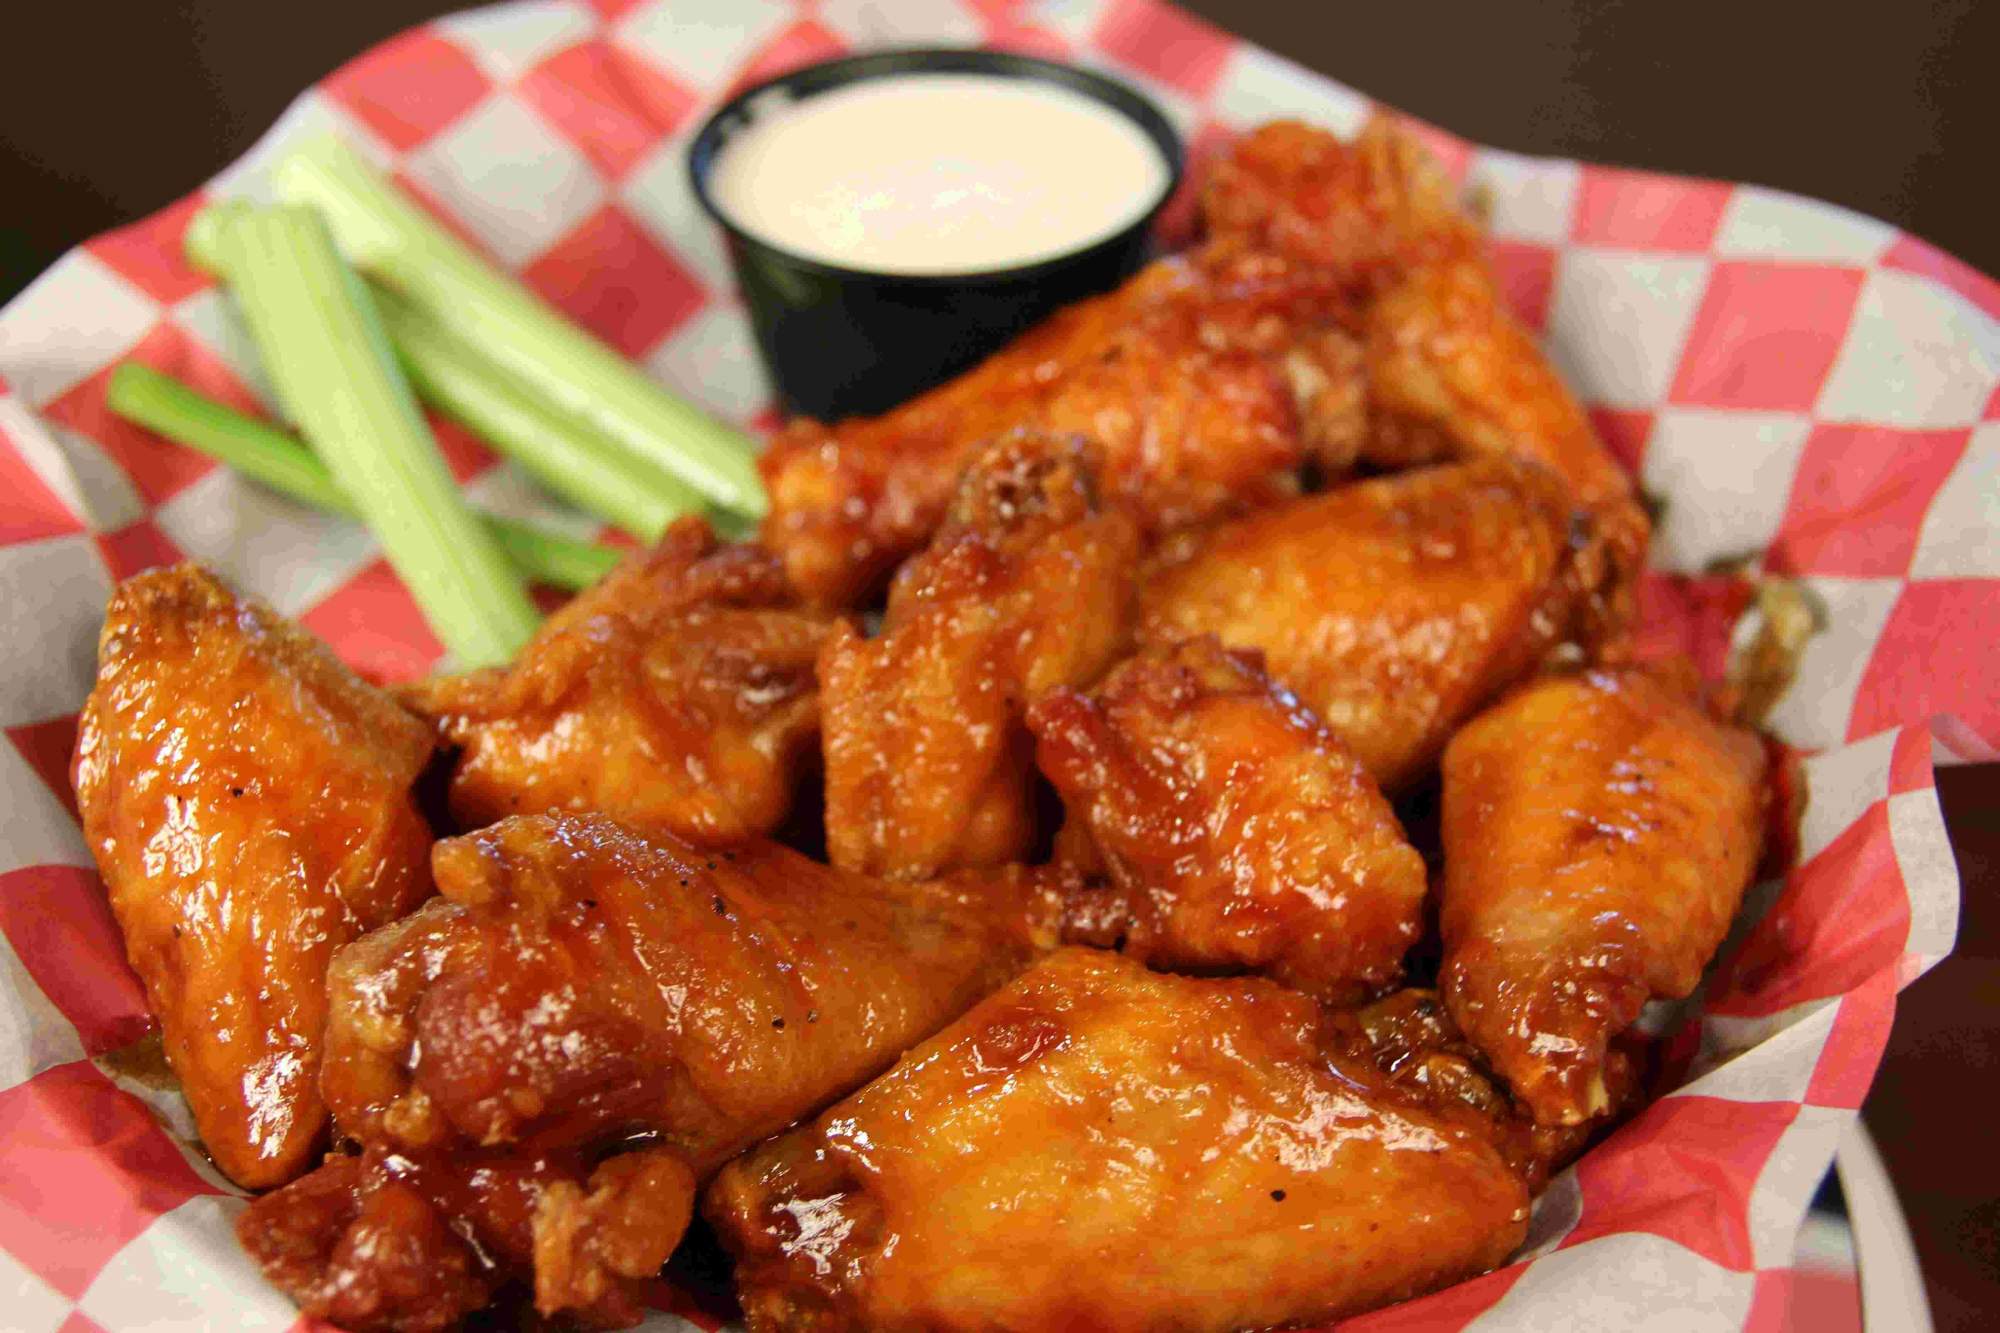 The best wings around with family friendly pricing